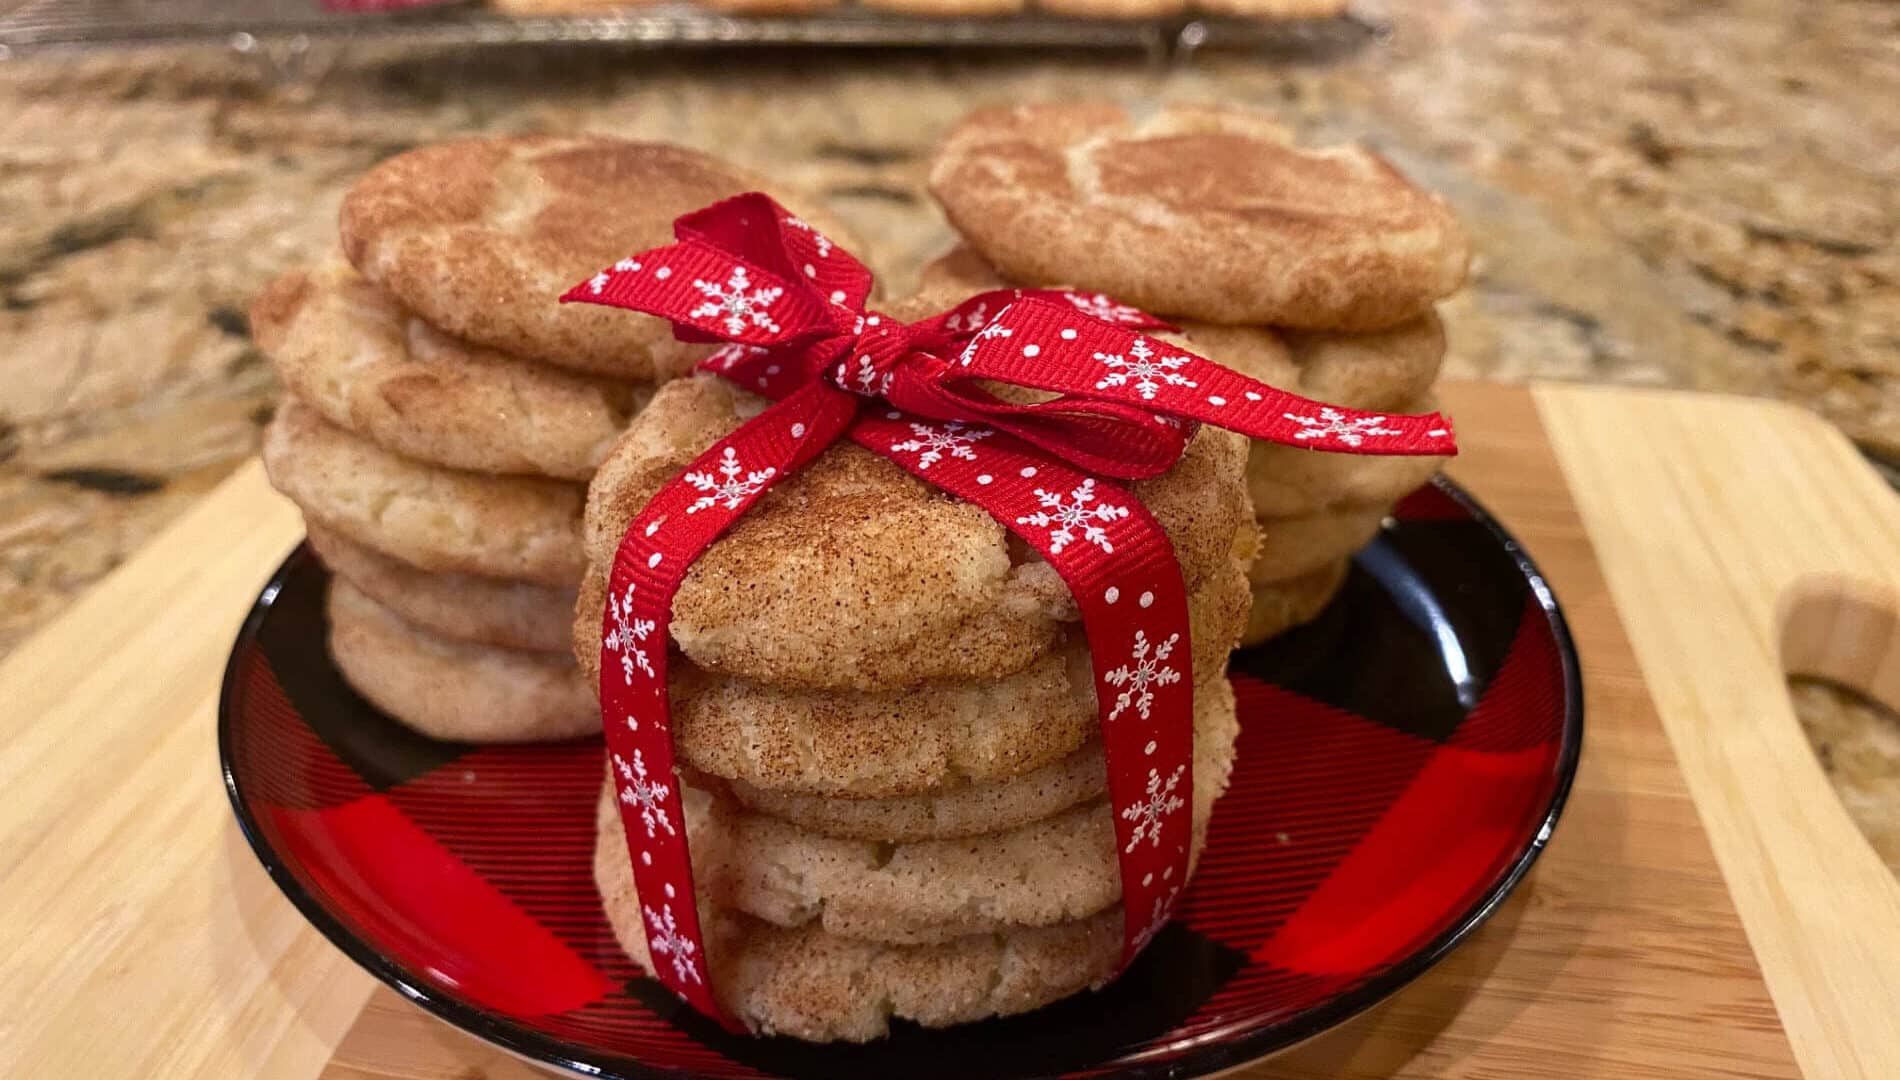 Golden round cookies coated with cinnamon and sugar, stacked and wrapped witjh a red and white snowflake ribbon